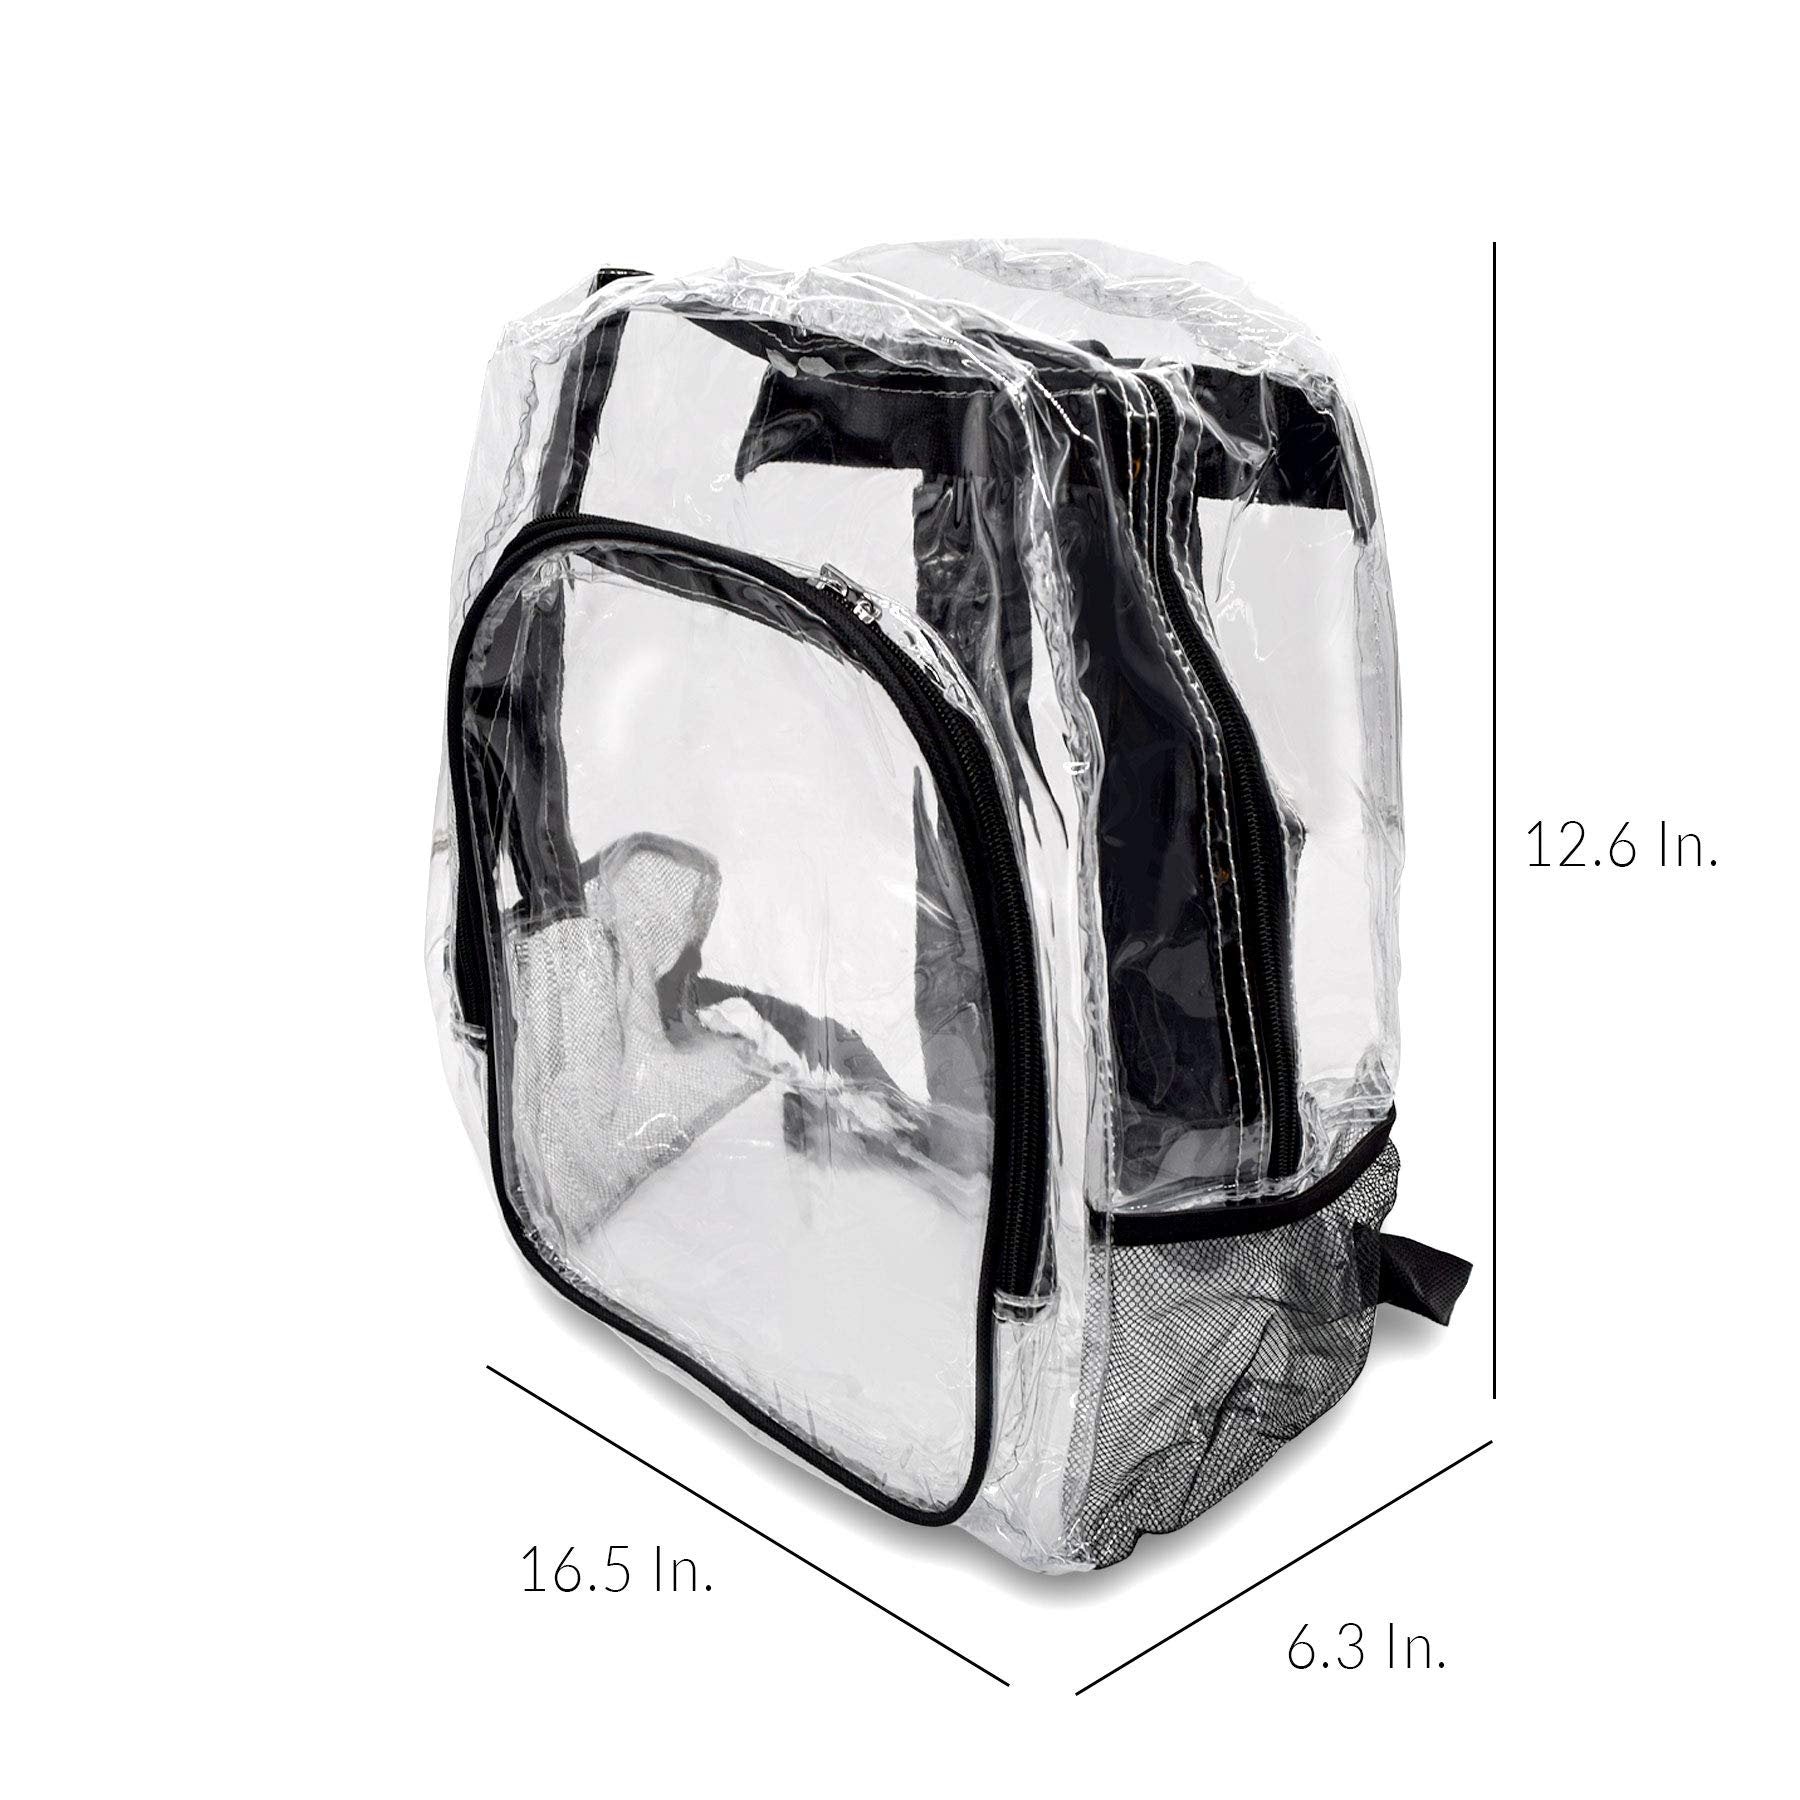 Clear Heavy Duty Backpack - Small Transparent Zippered Bookbag for School, Stadium, Events, 16.5x12.6x6.3